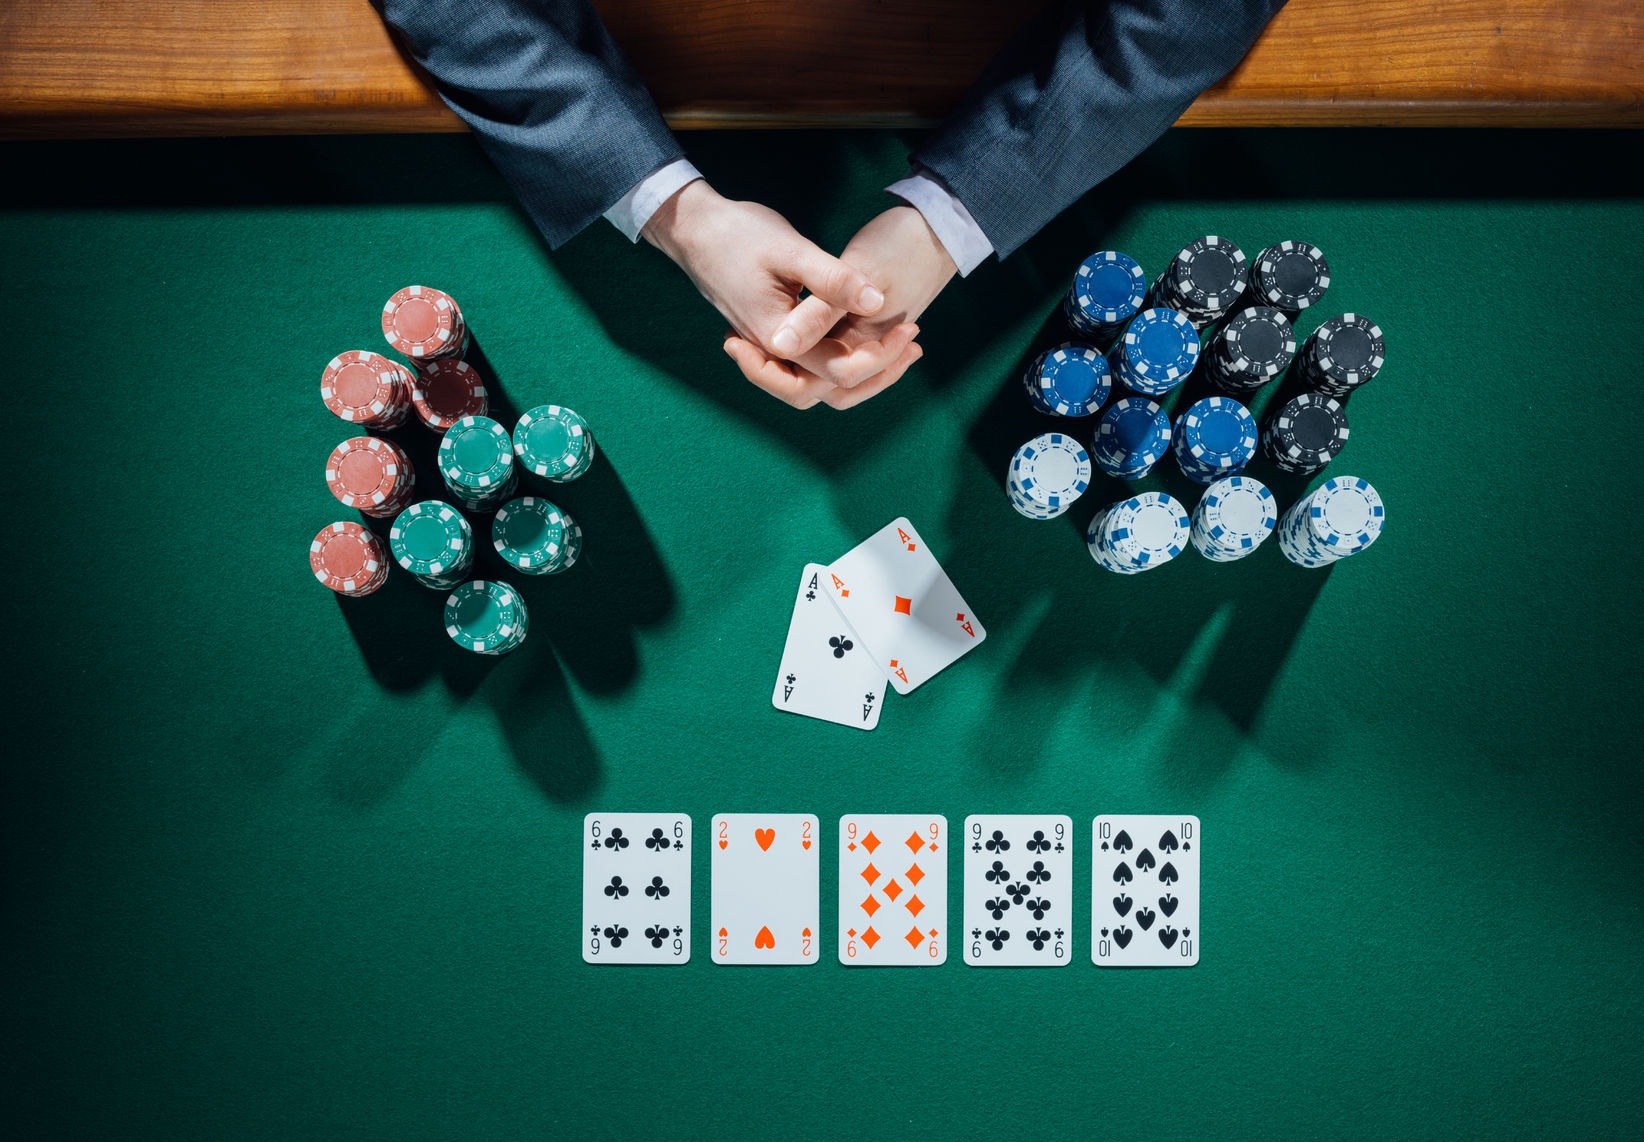 What is Pai Gow Poker? How does it differ from the traditional game?